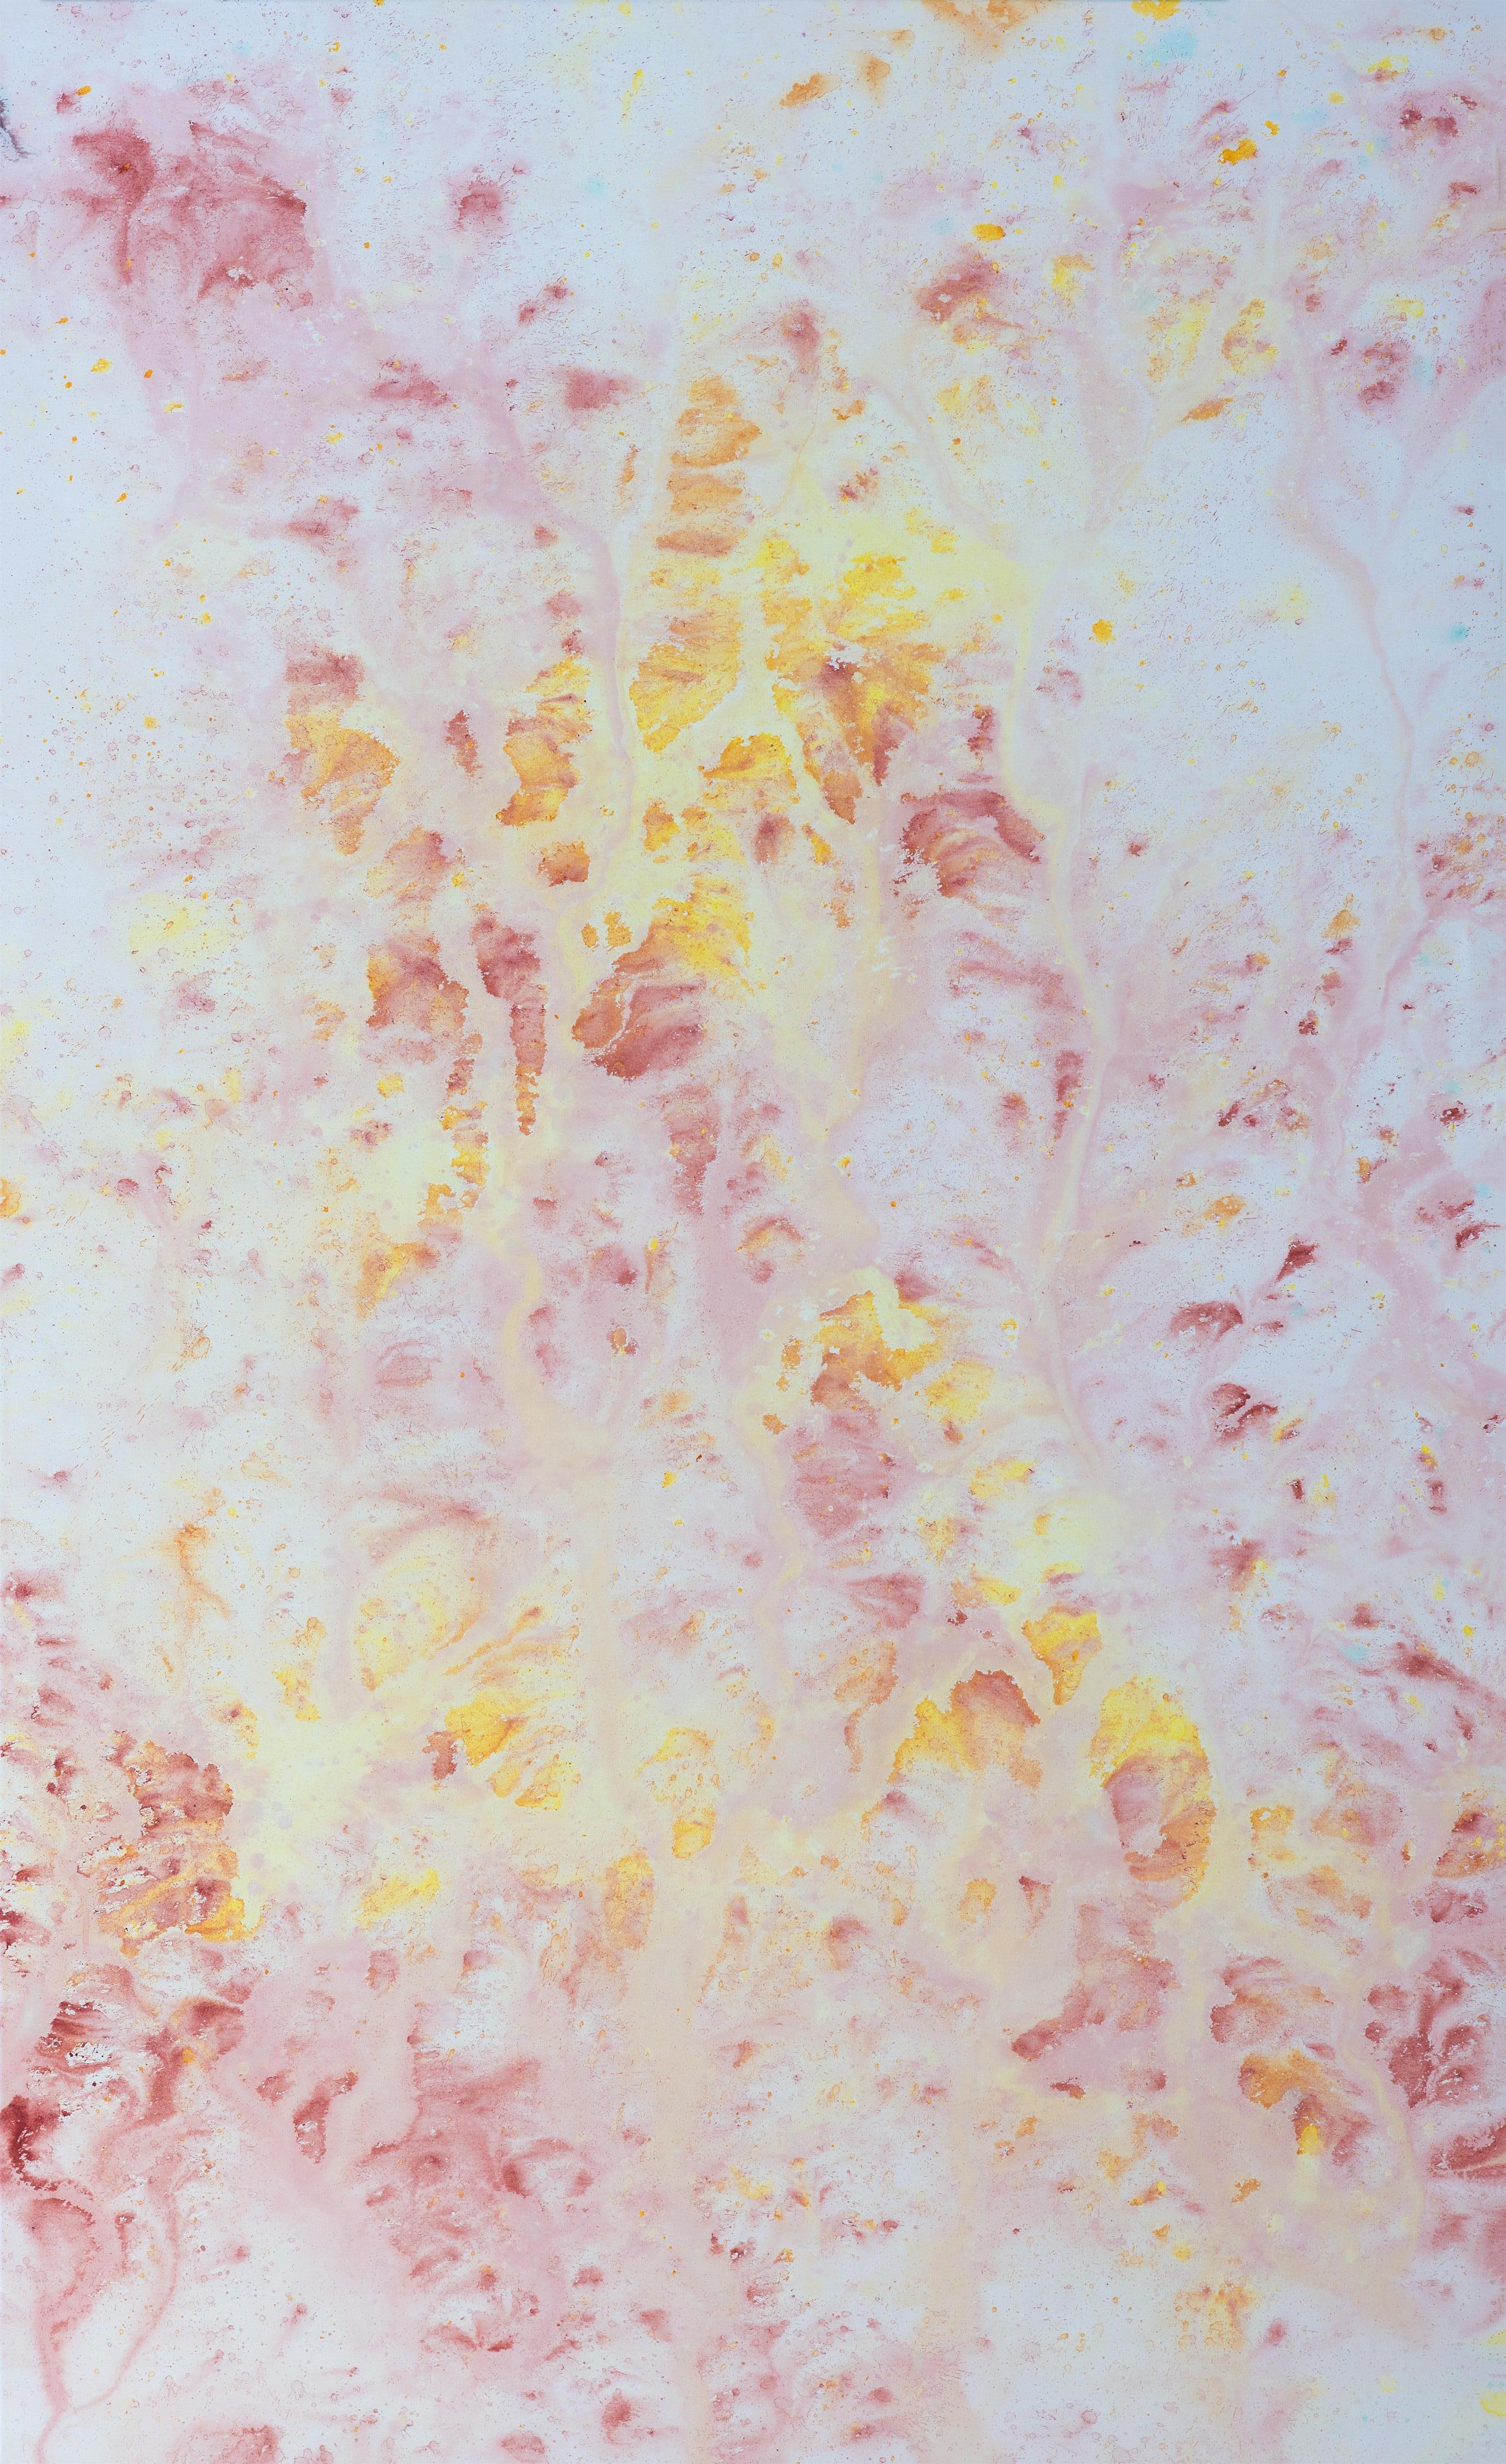 Registros IX, 2023 by Nat Orlowski
From the series Registros
Lacquers, pigments, Indian ink, acrylic, water, and sun on canvas.
Size: 240 H cm x 140 W cm. 
Uniqe 

Impressions of past lives, perceptions of future lives. The Records series carries